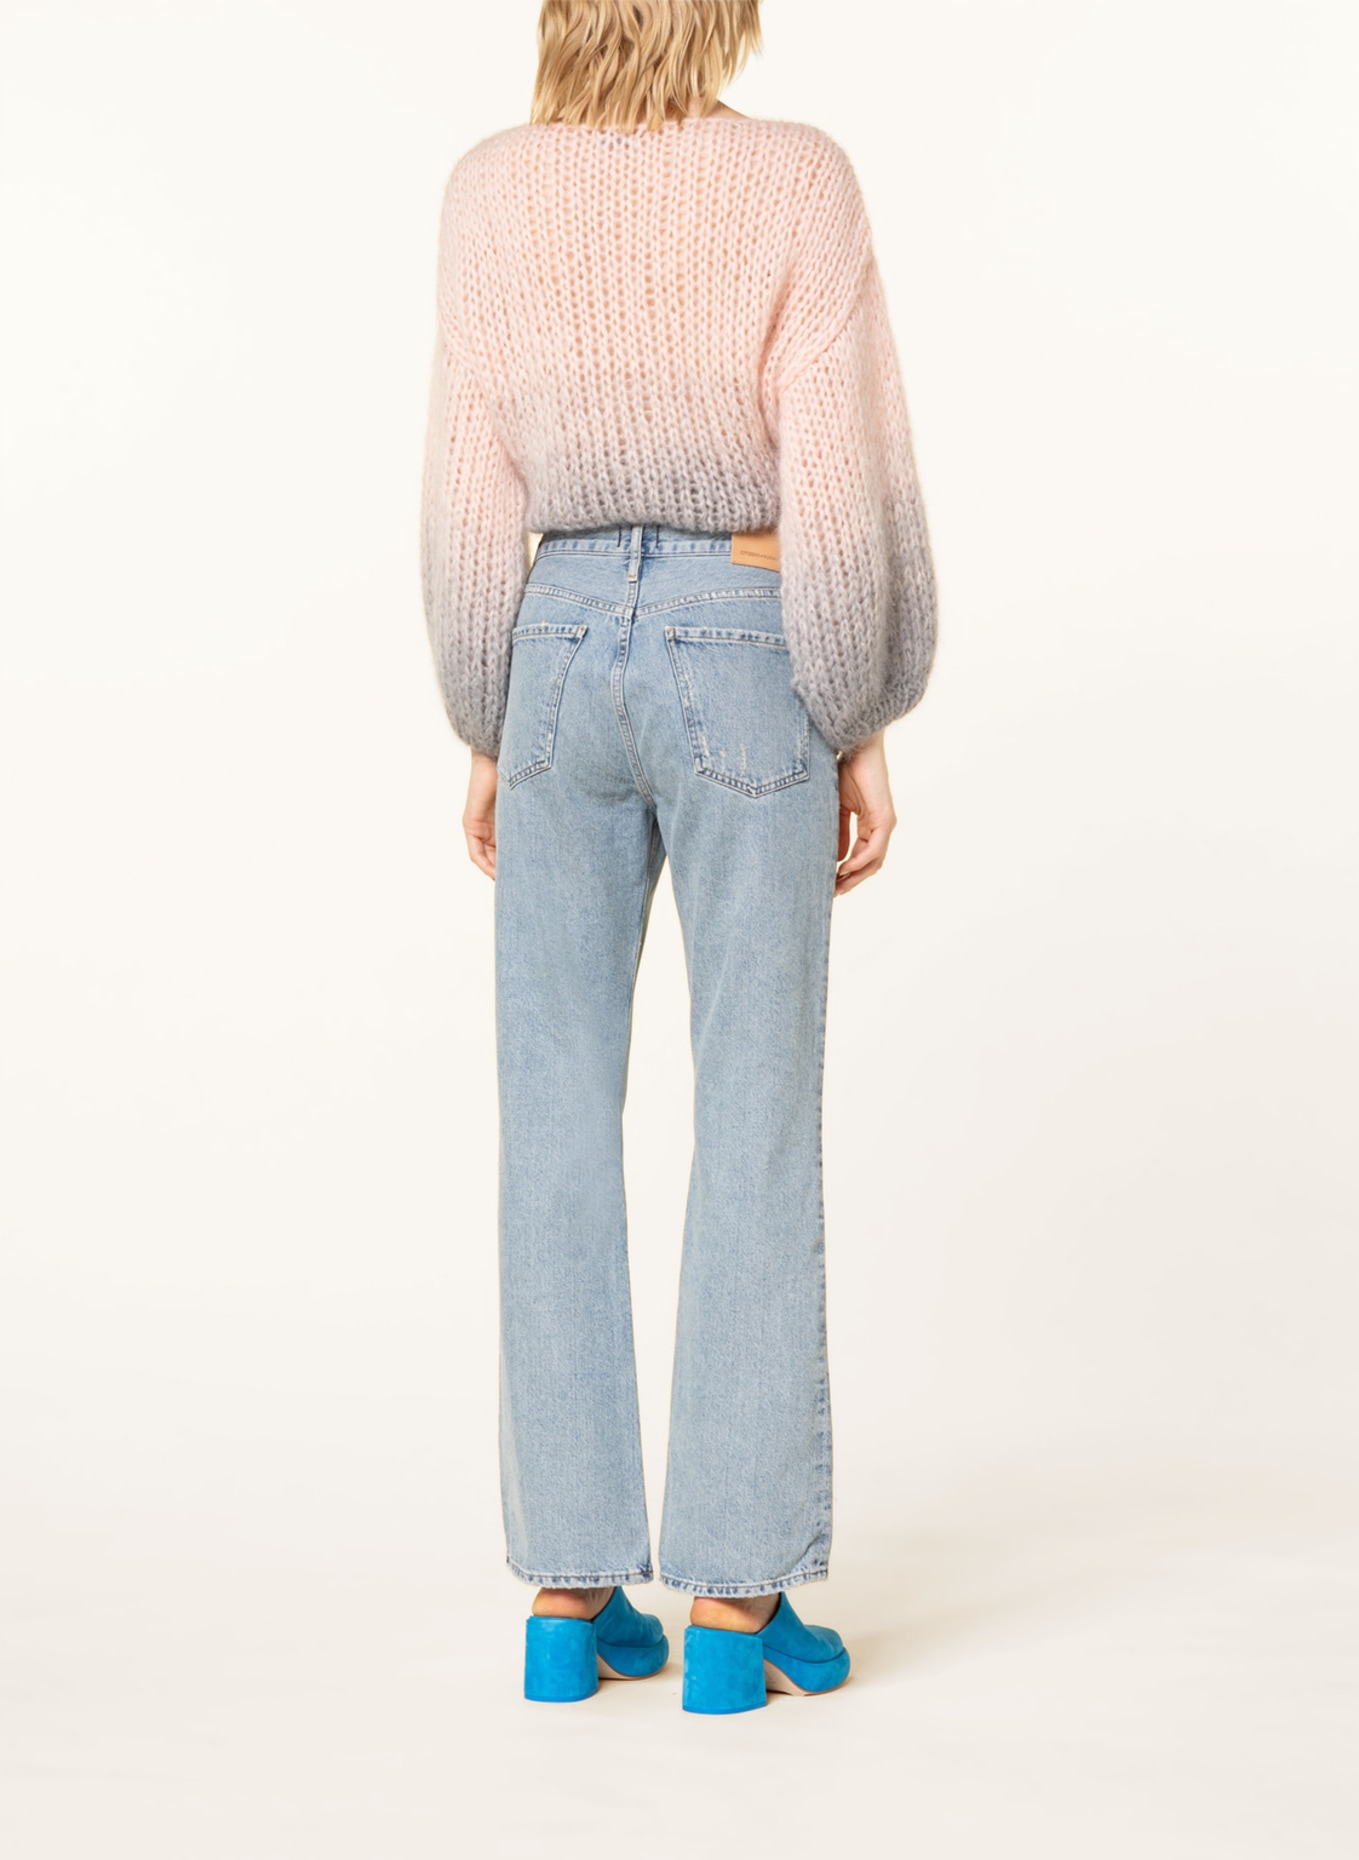 CITIZENS of HUMANITY Straight Jeans LIBBY, Farbe: High Road lt vintage indigo (Bild 3)